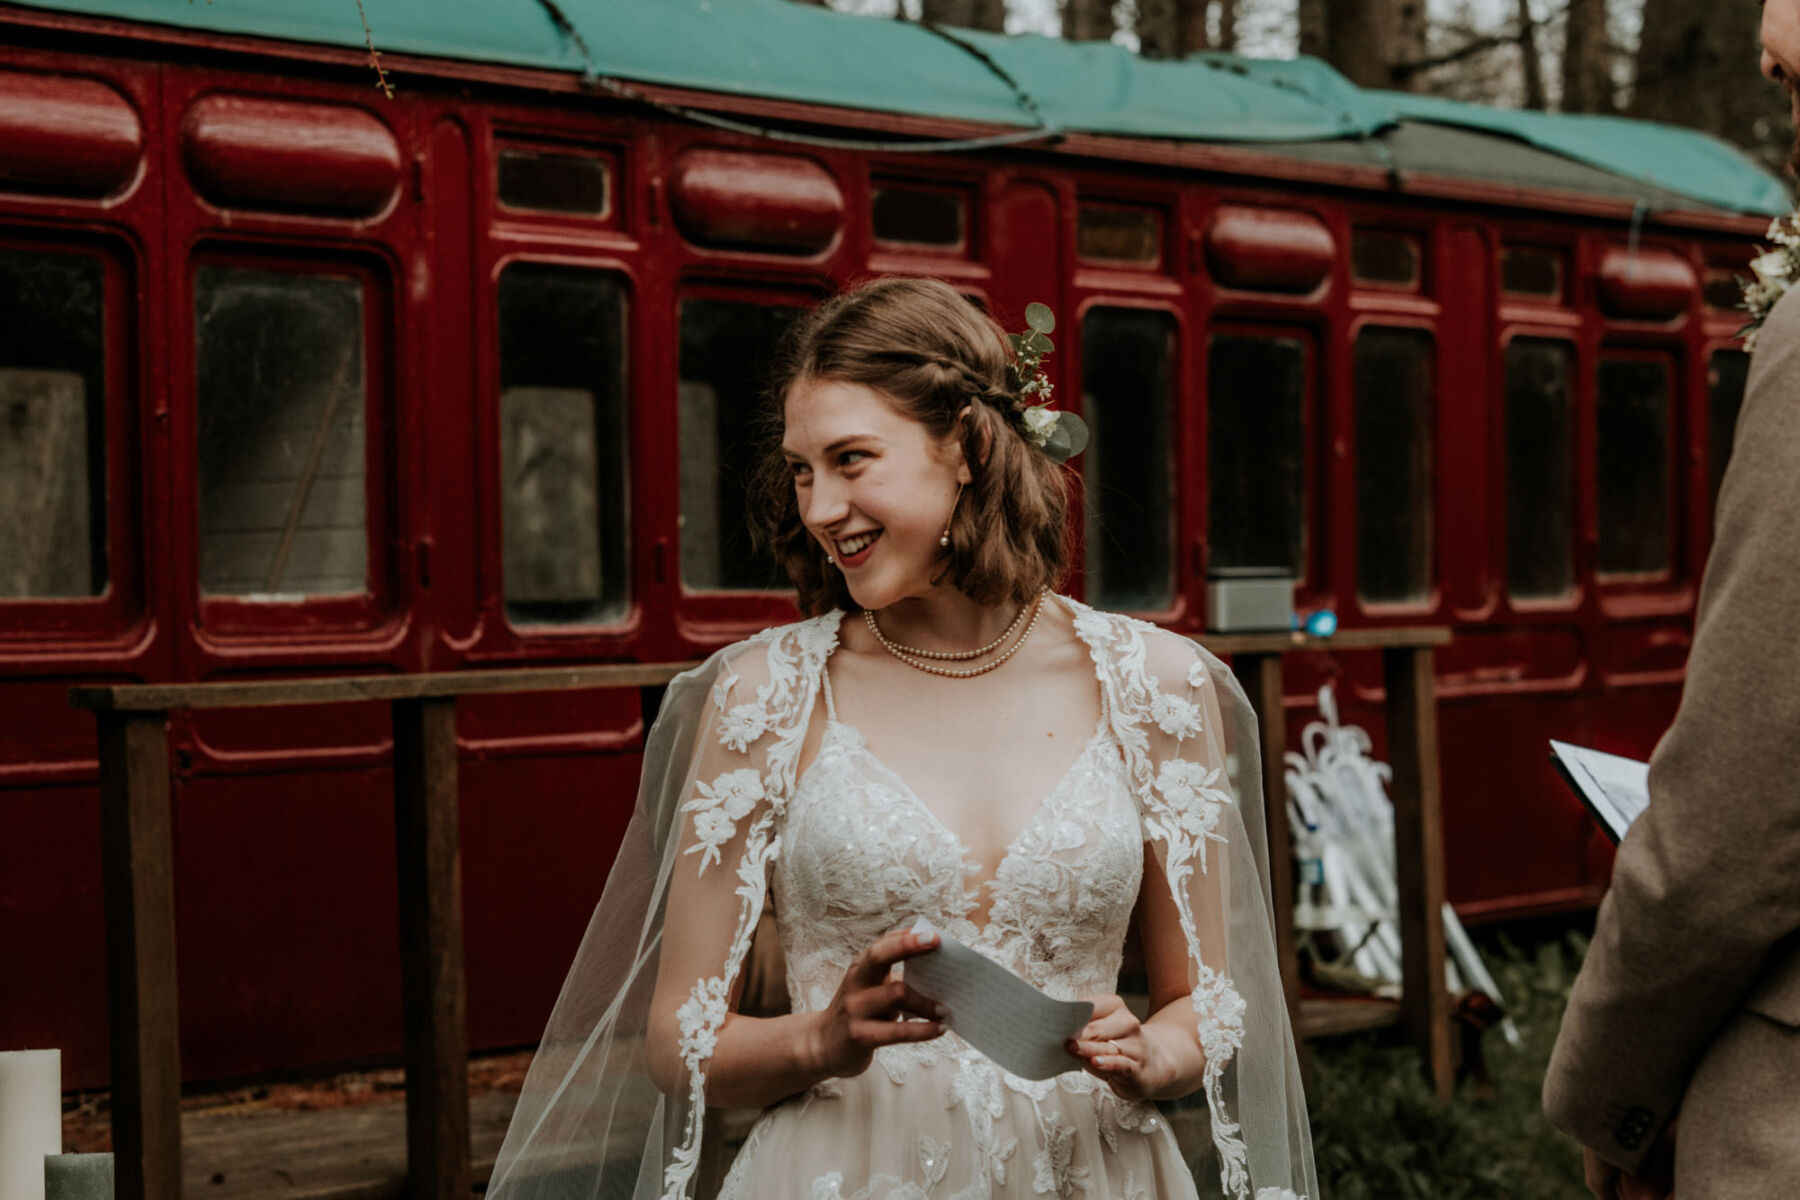 Bride in lace dress and bridal cape standing by an old train carriage